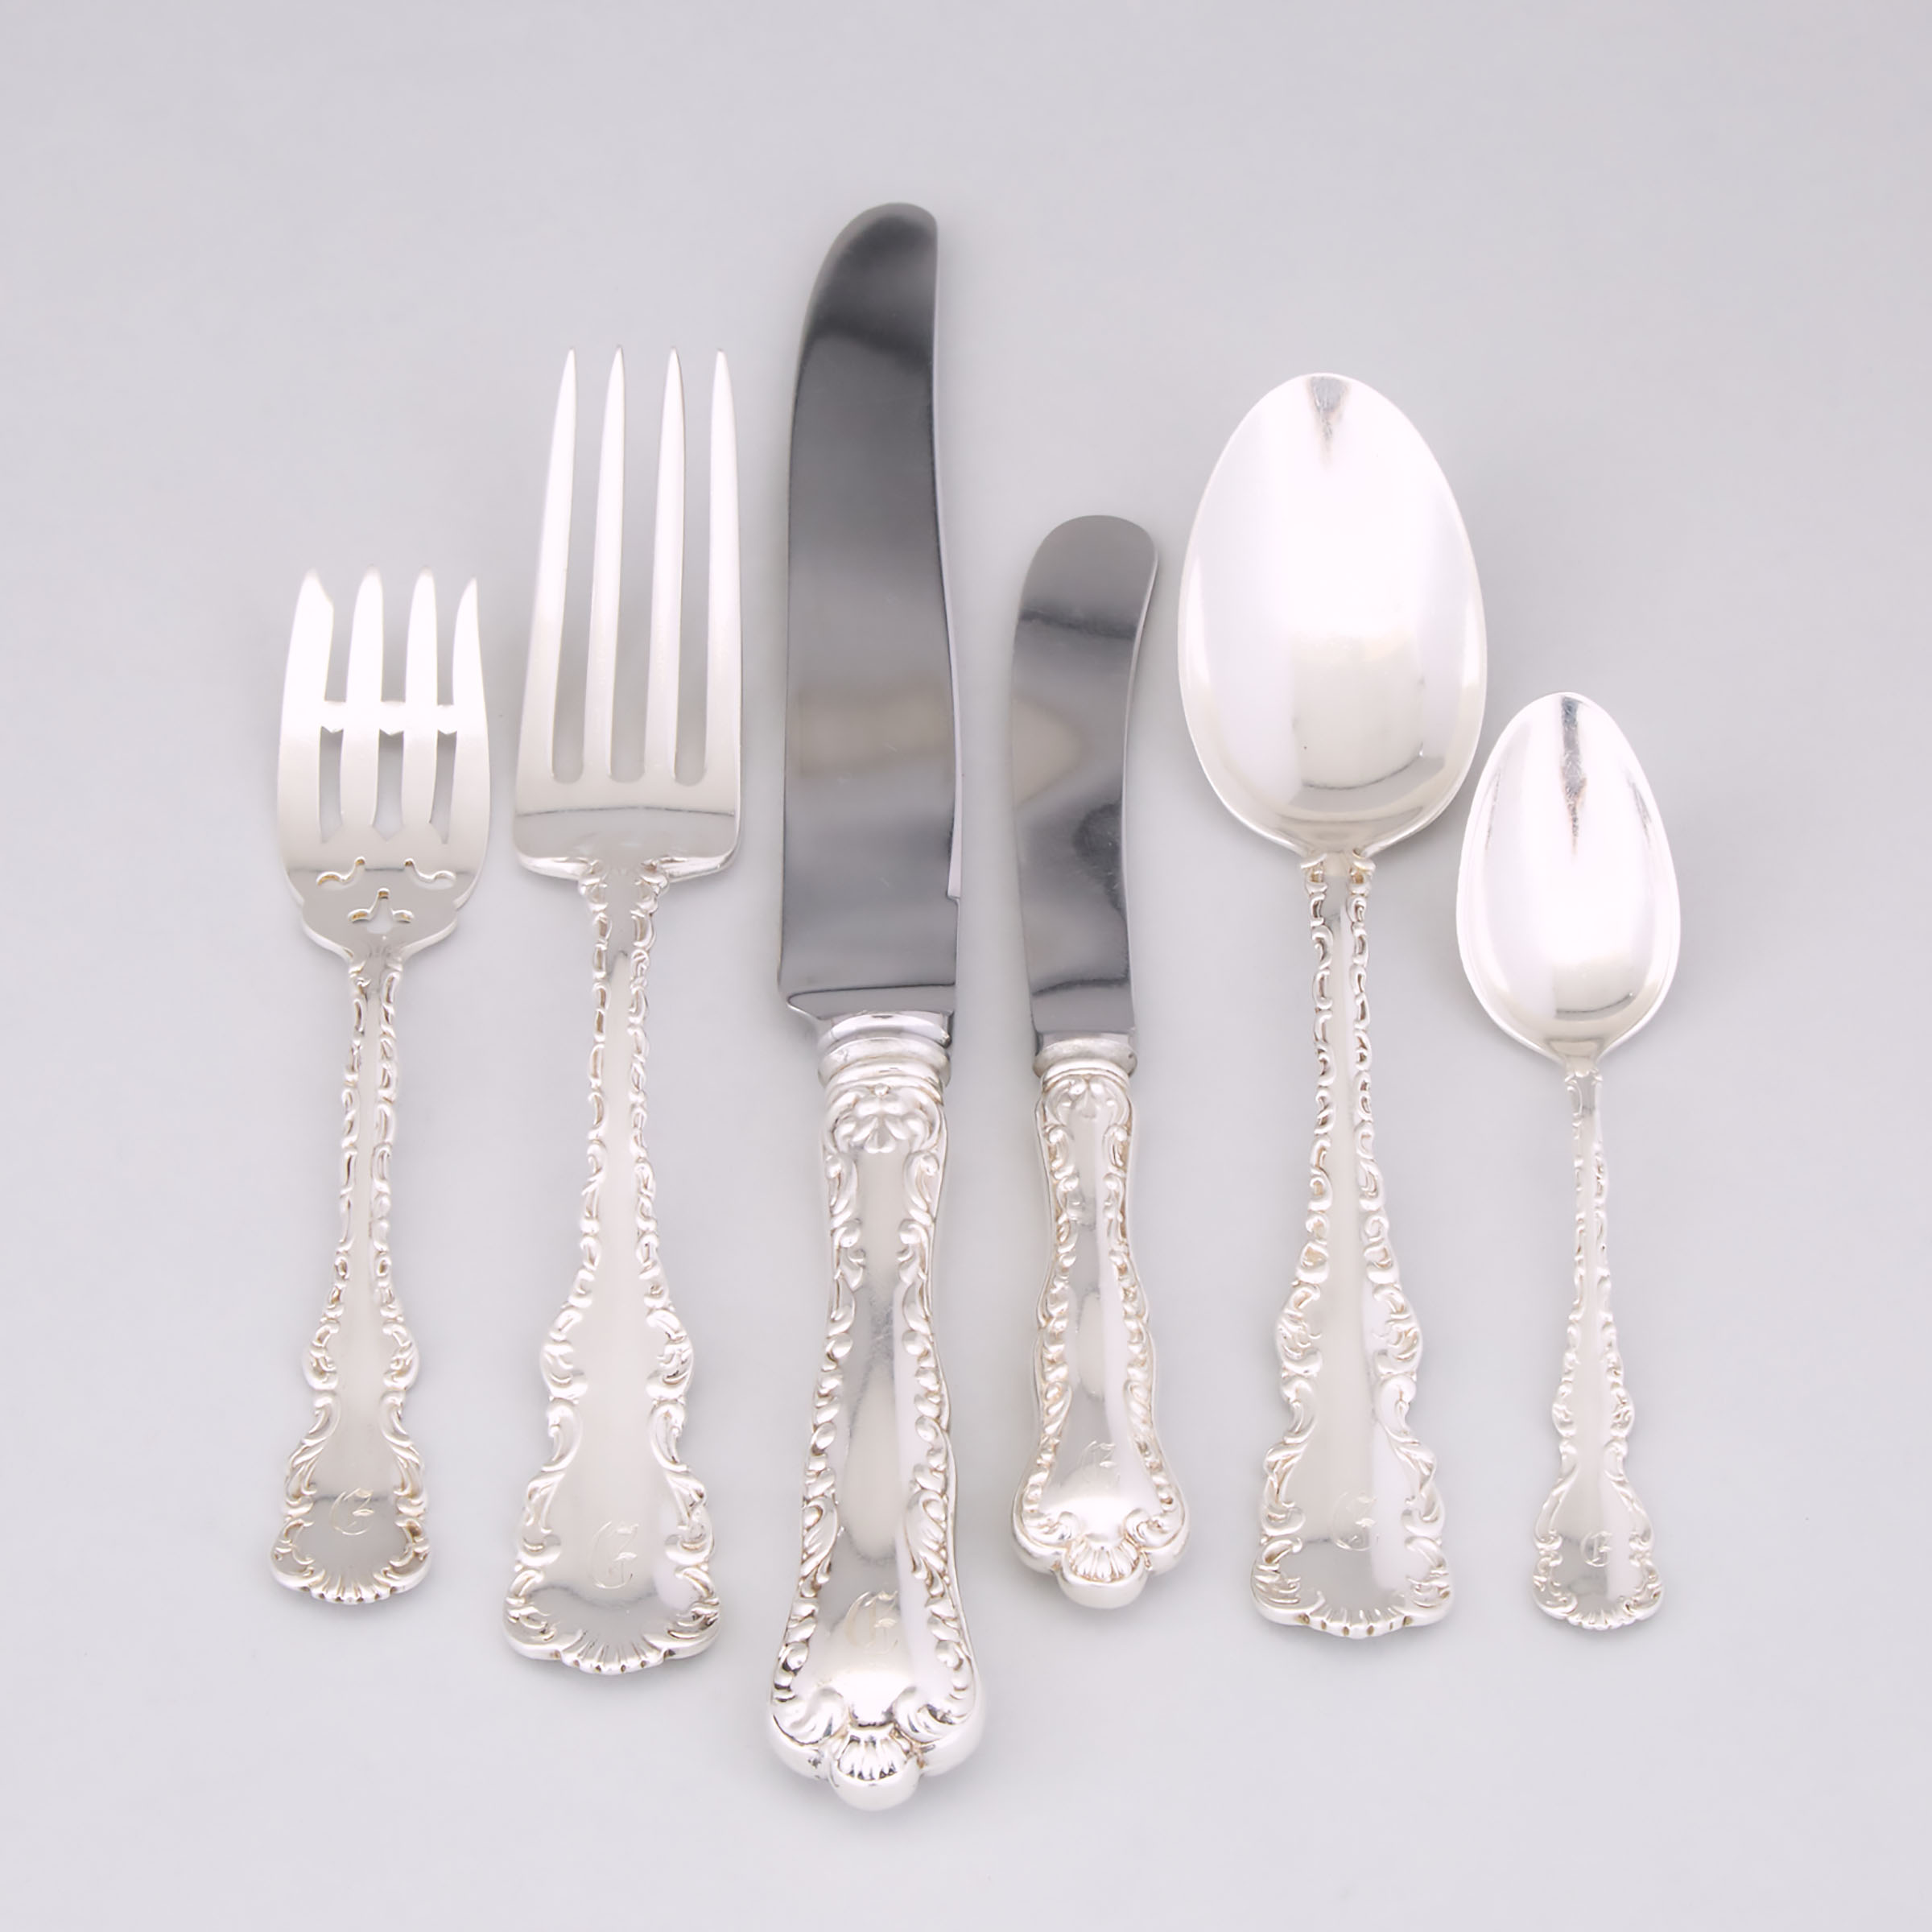 Assembled Canadian Silver 'Louis XV' Pattern Flatware Service, Henry Birks & Sons, Roden Bros. and Ryrie Bros., 20th century